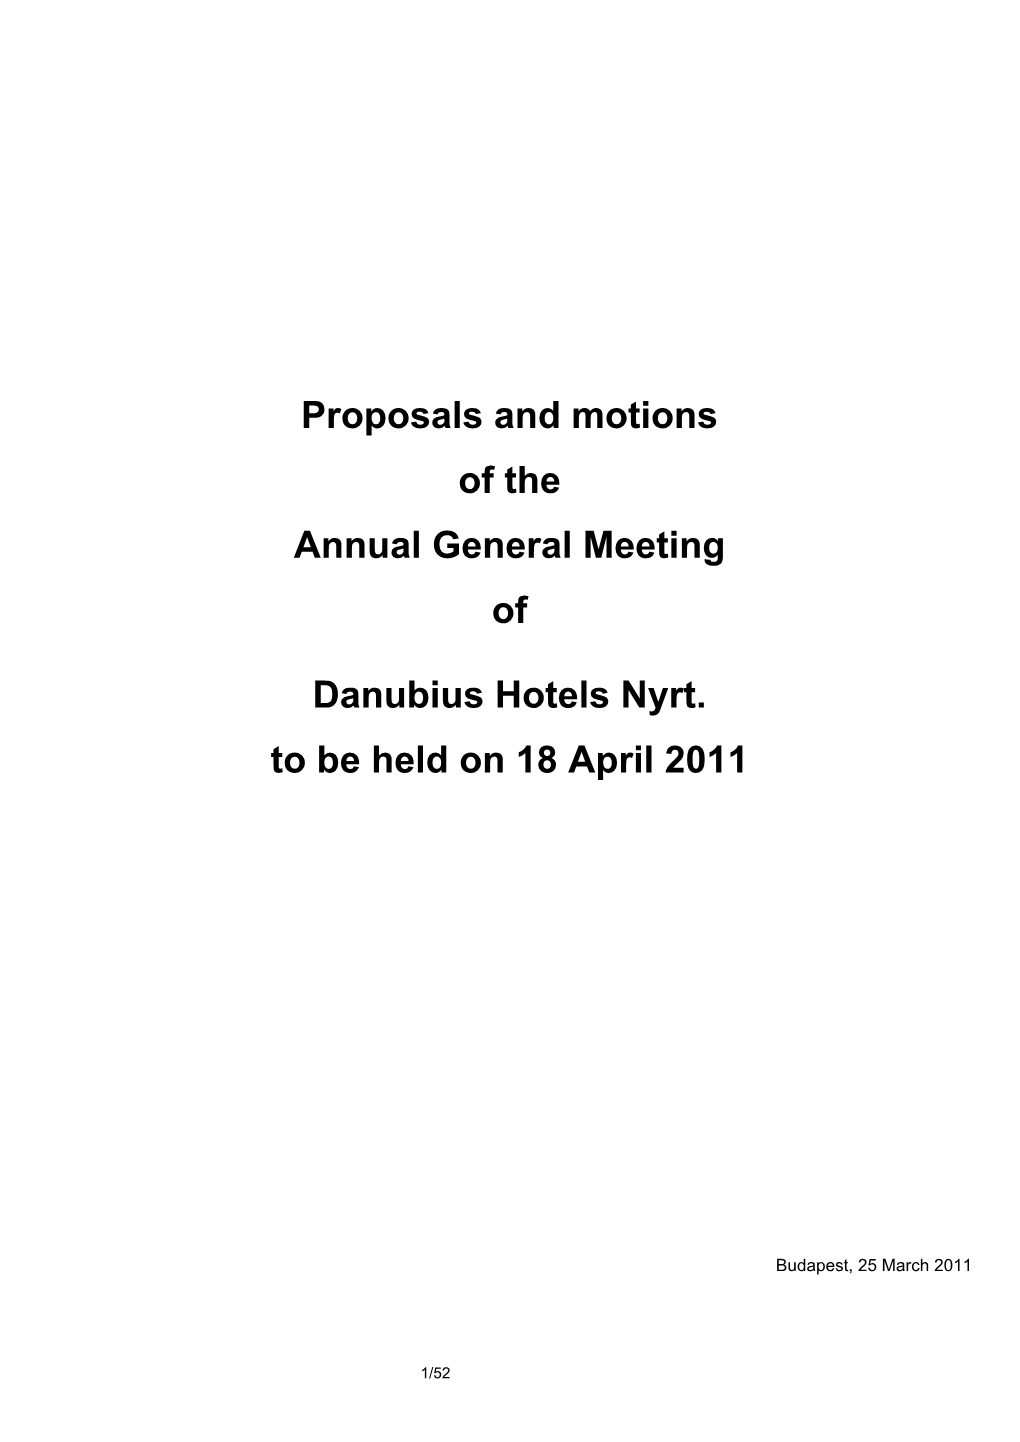 Proposals and Motions of the Annual General Meeting of Danubius